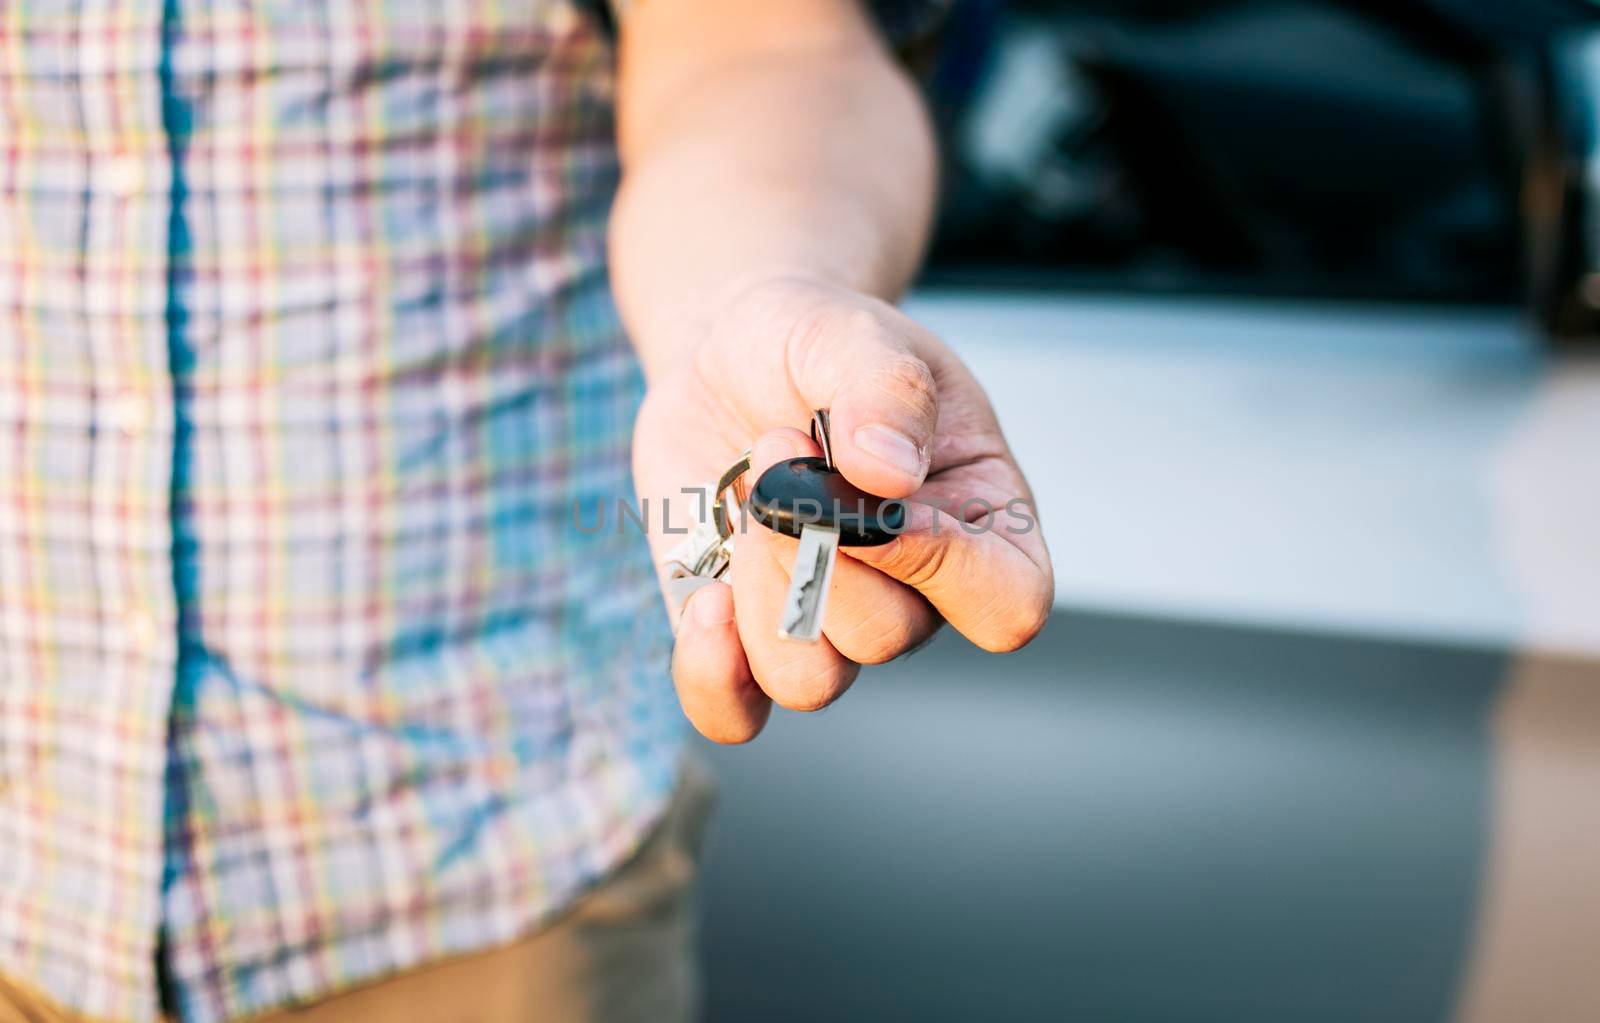 Driver's hands showing the car keys, Close-up of male driver hands showing the keys, Vehicle rental concept. Close-up of people holding car keys